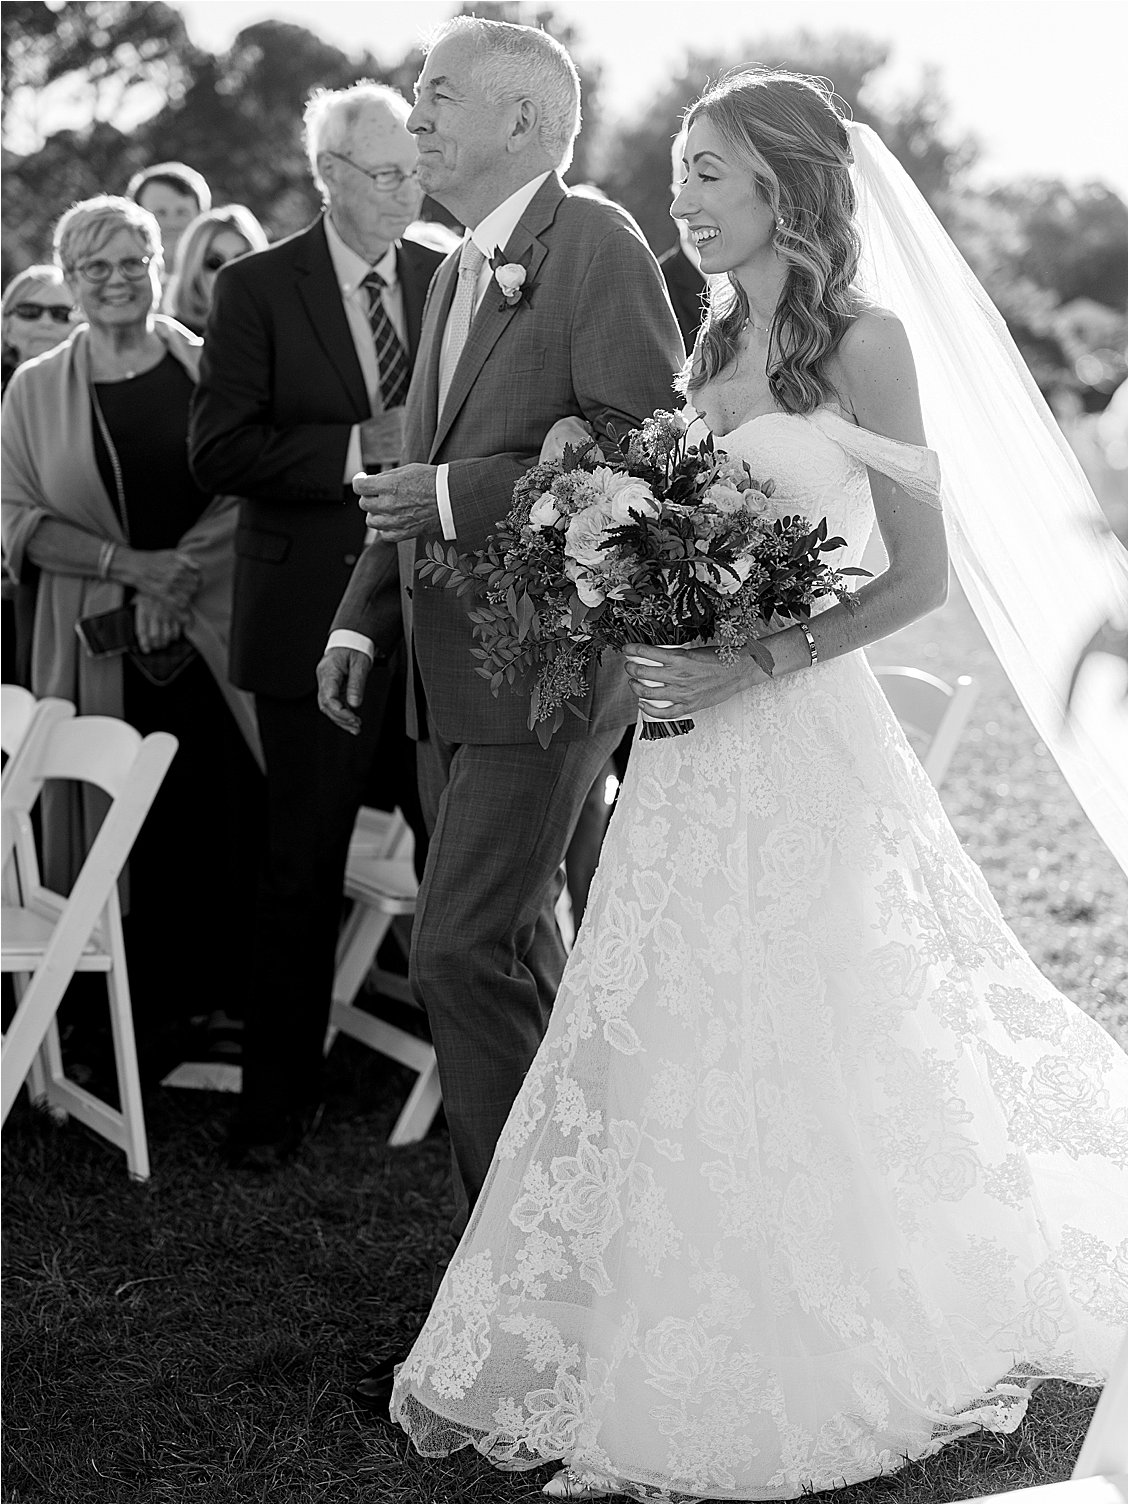 Black and white image of father walking his daughter down the aisle